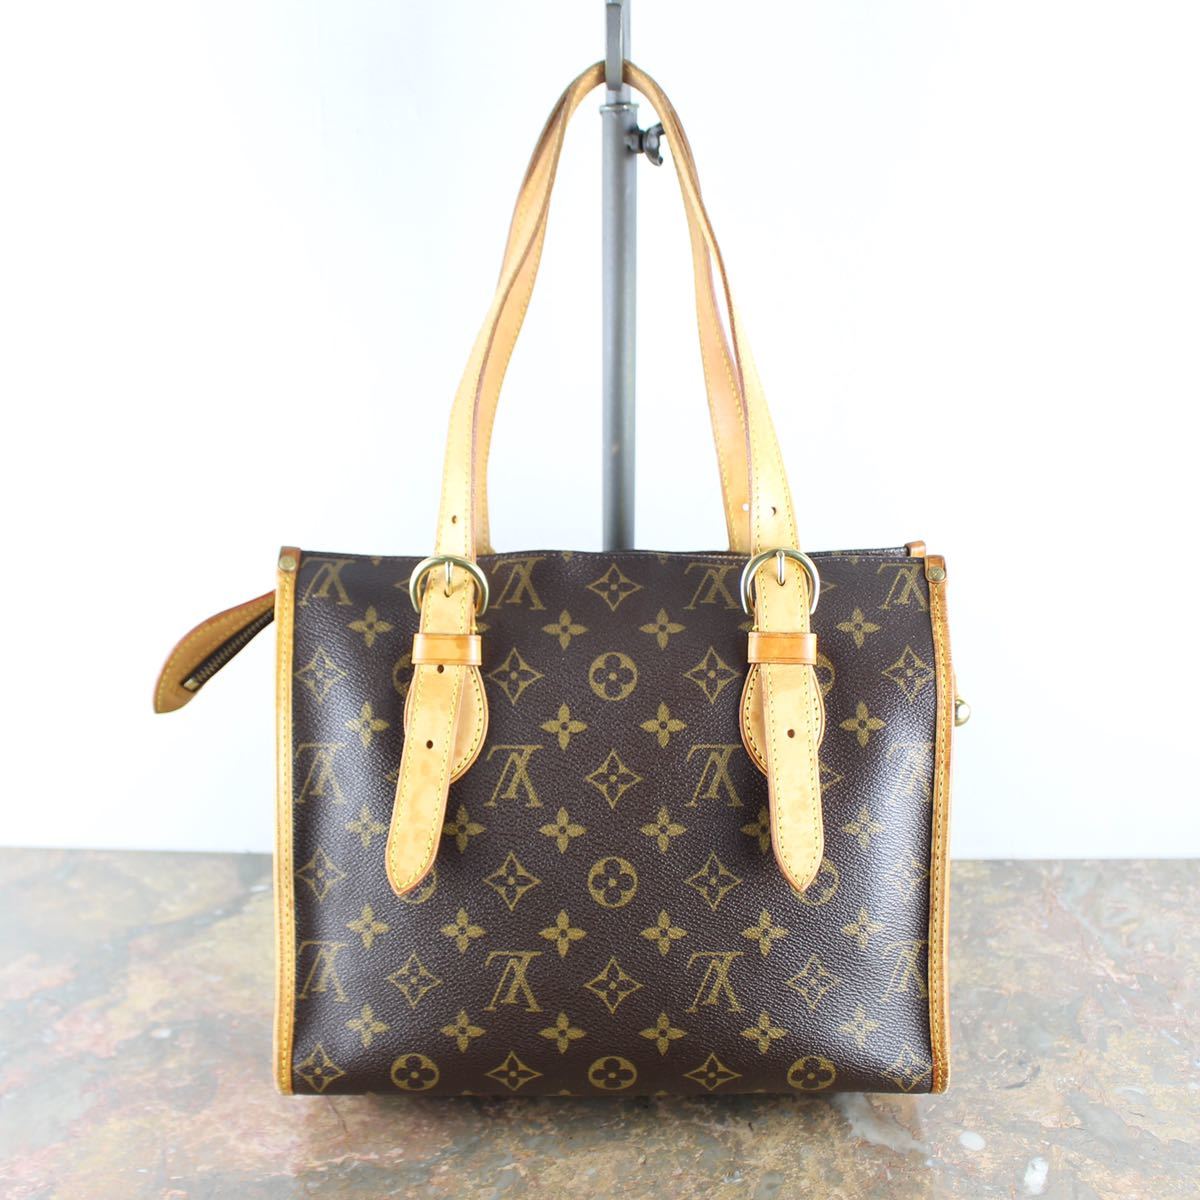 LOUIS VUITTON M40007 FL0045 MONOGRAM PATTERNED TOTE BAG MADE IN